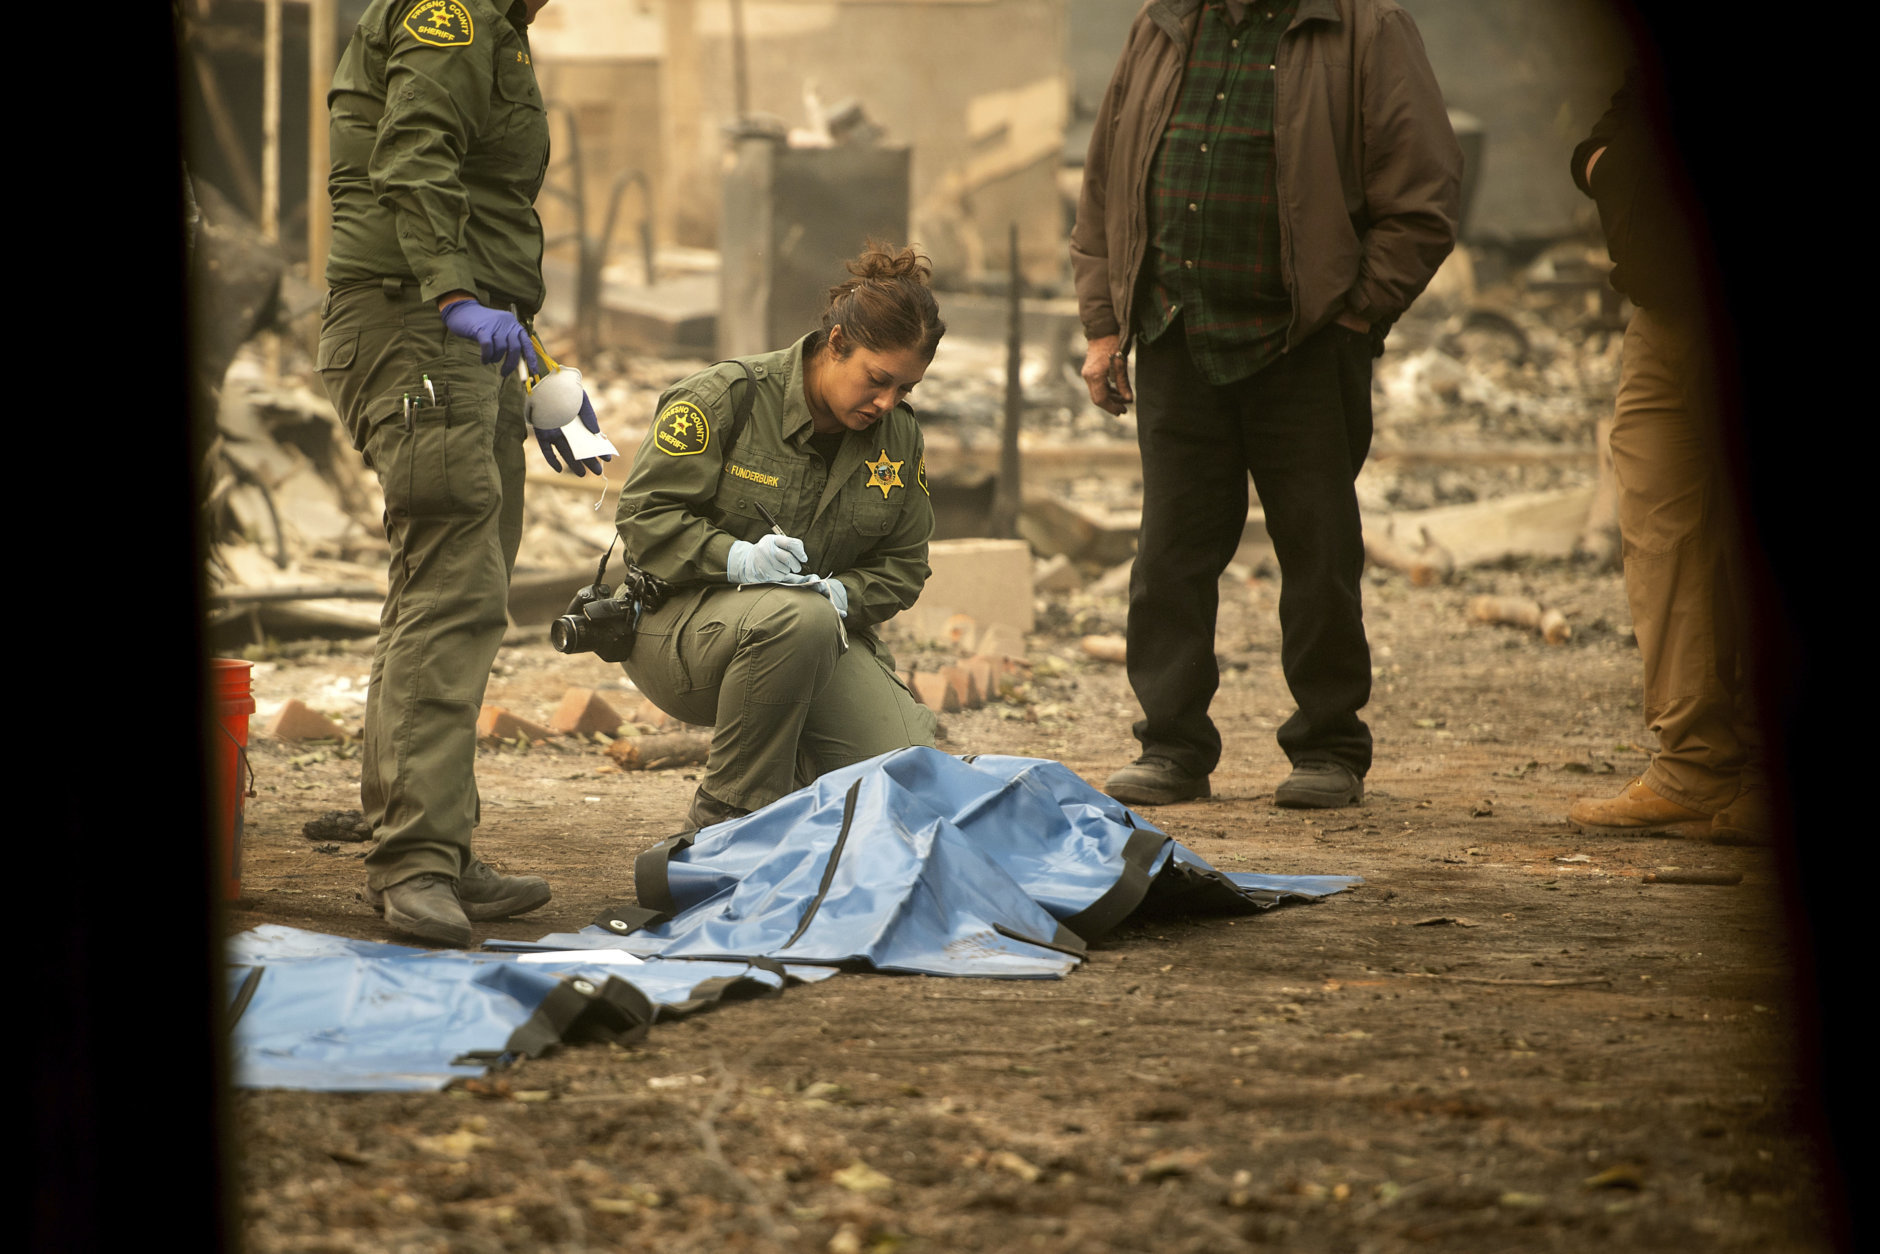 Sheriff's deputies recover the bodies of multiple Camp Fire victims from a Holly Hills Mobile Estates residence on Wednesday, Nov. 14, 2018, in Paradise, Calif. (AP Photo/Noah Berger)